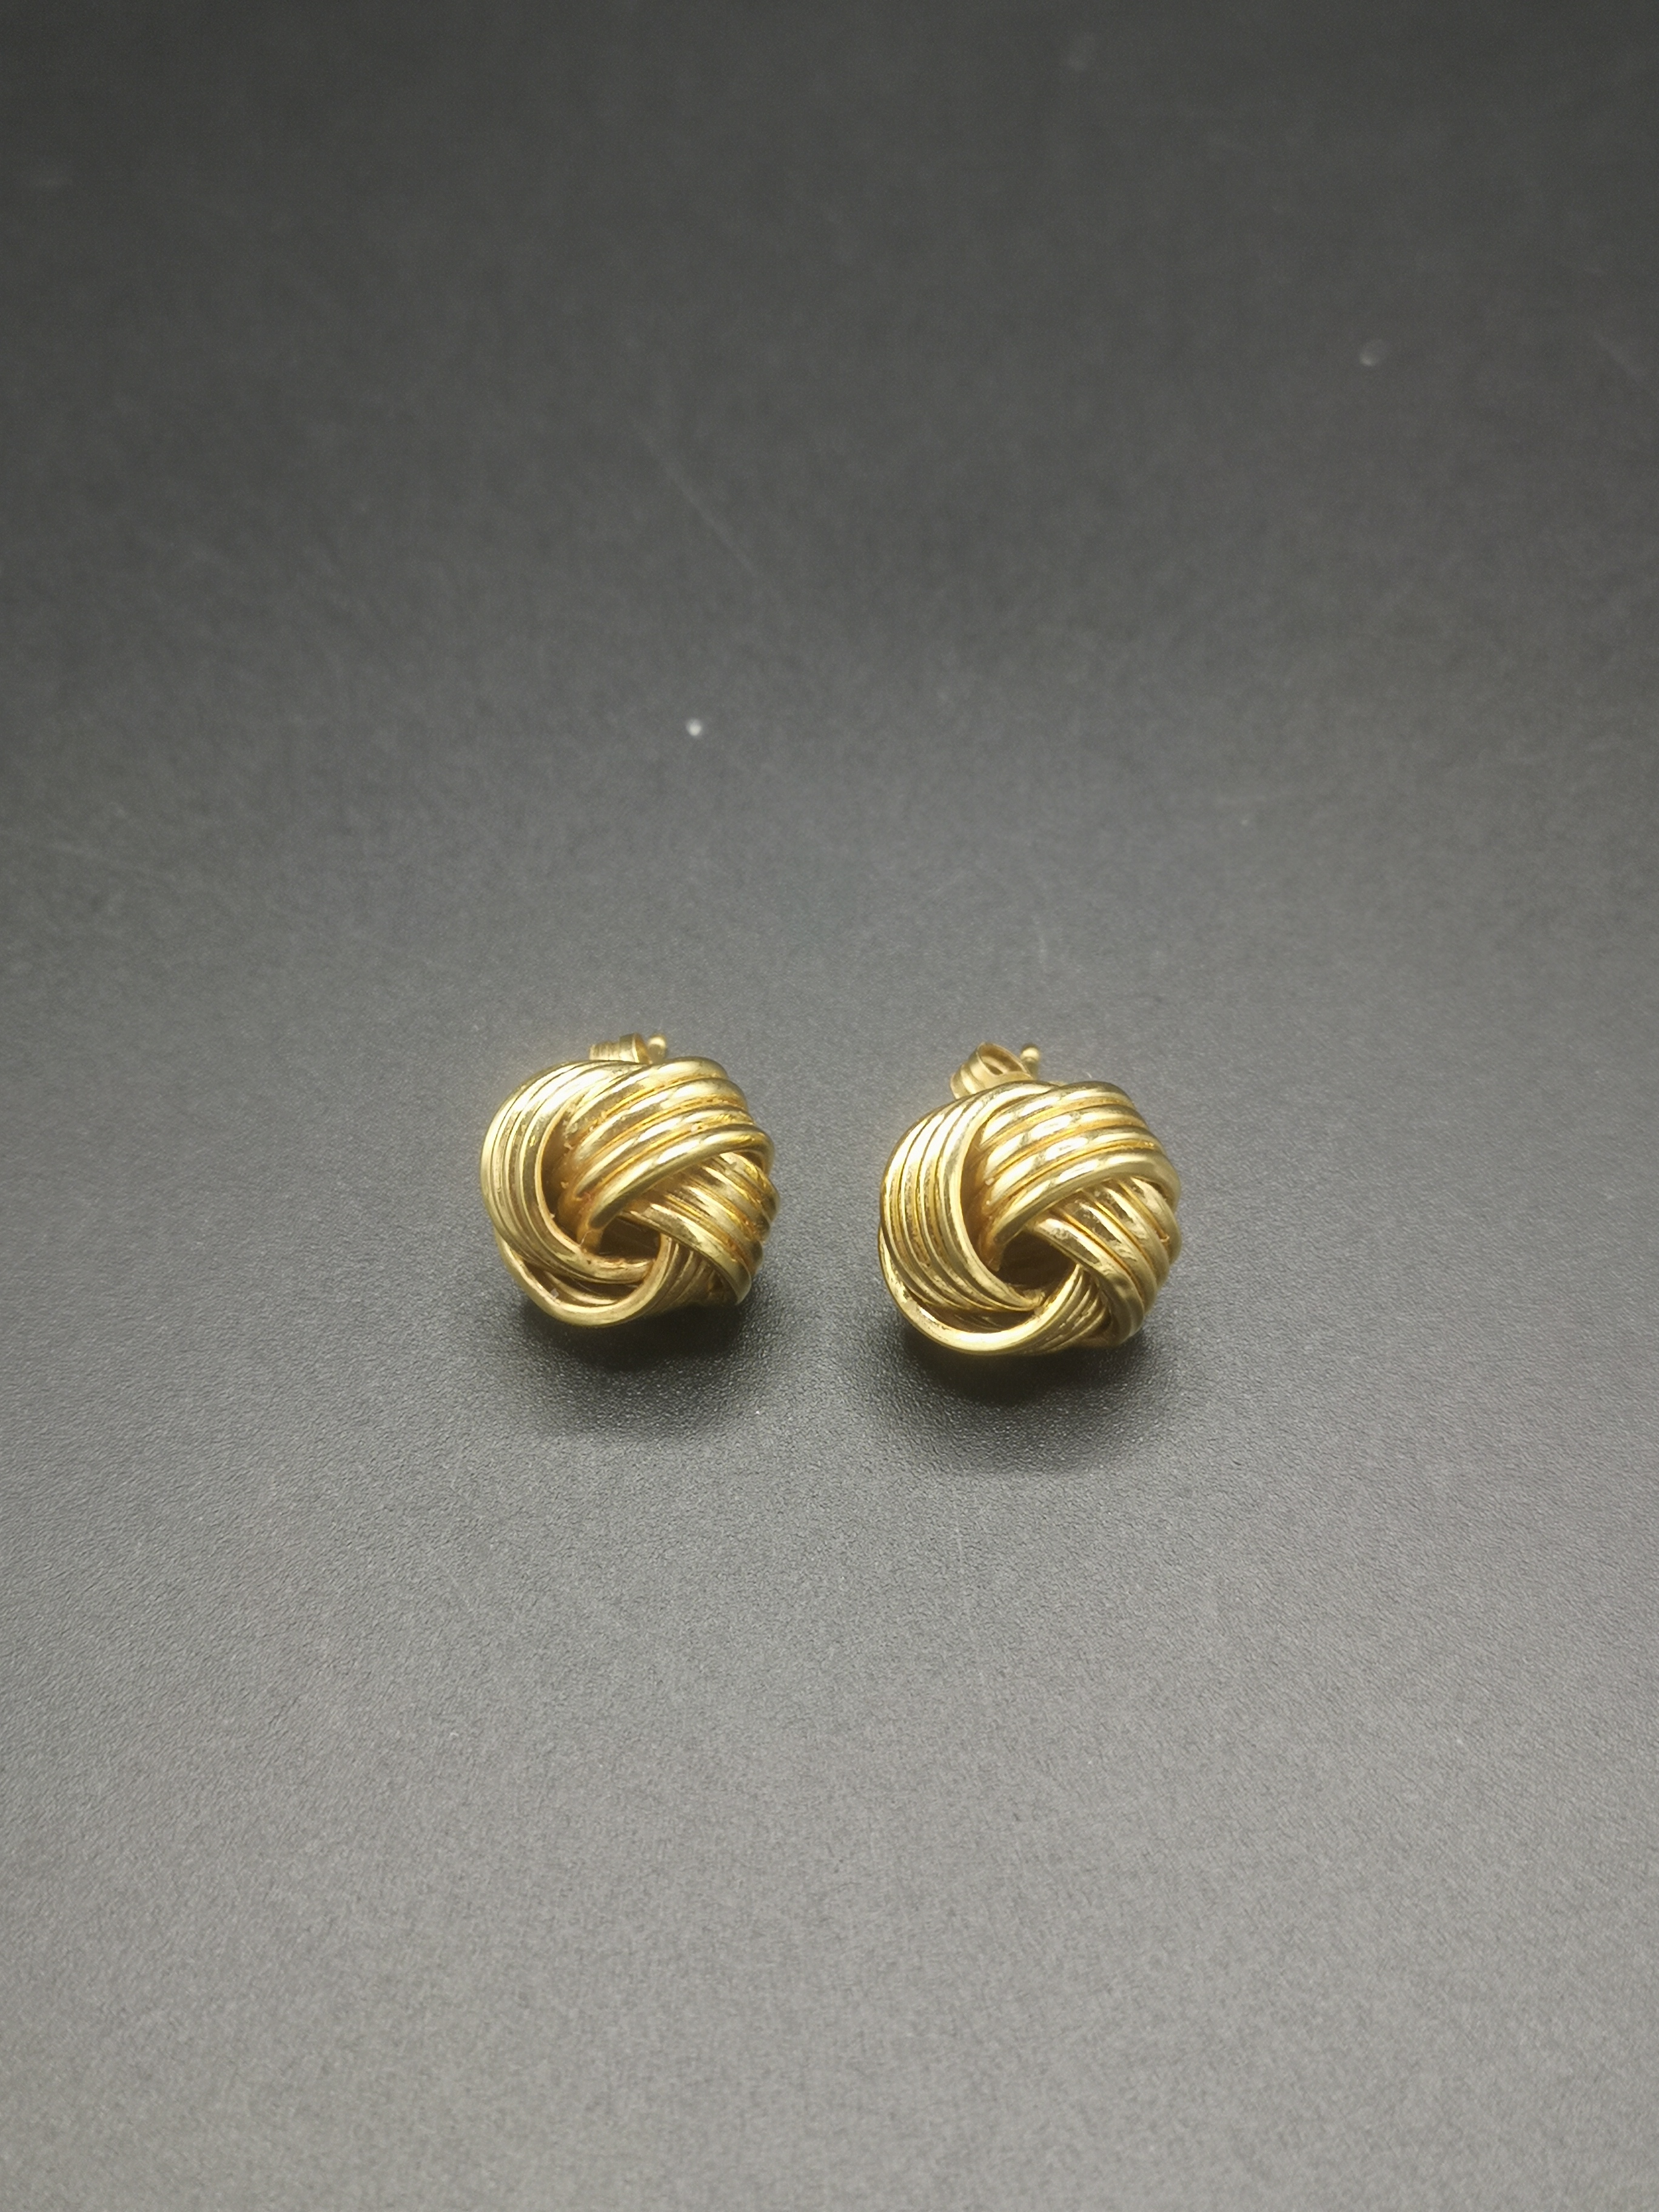 Pair of 18ct gold earrings - Image 4 of 4